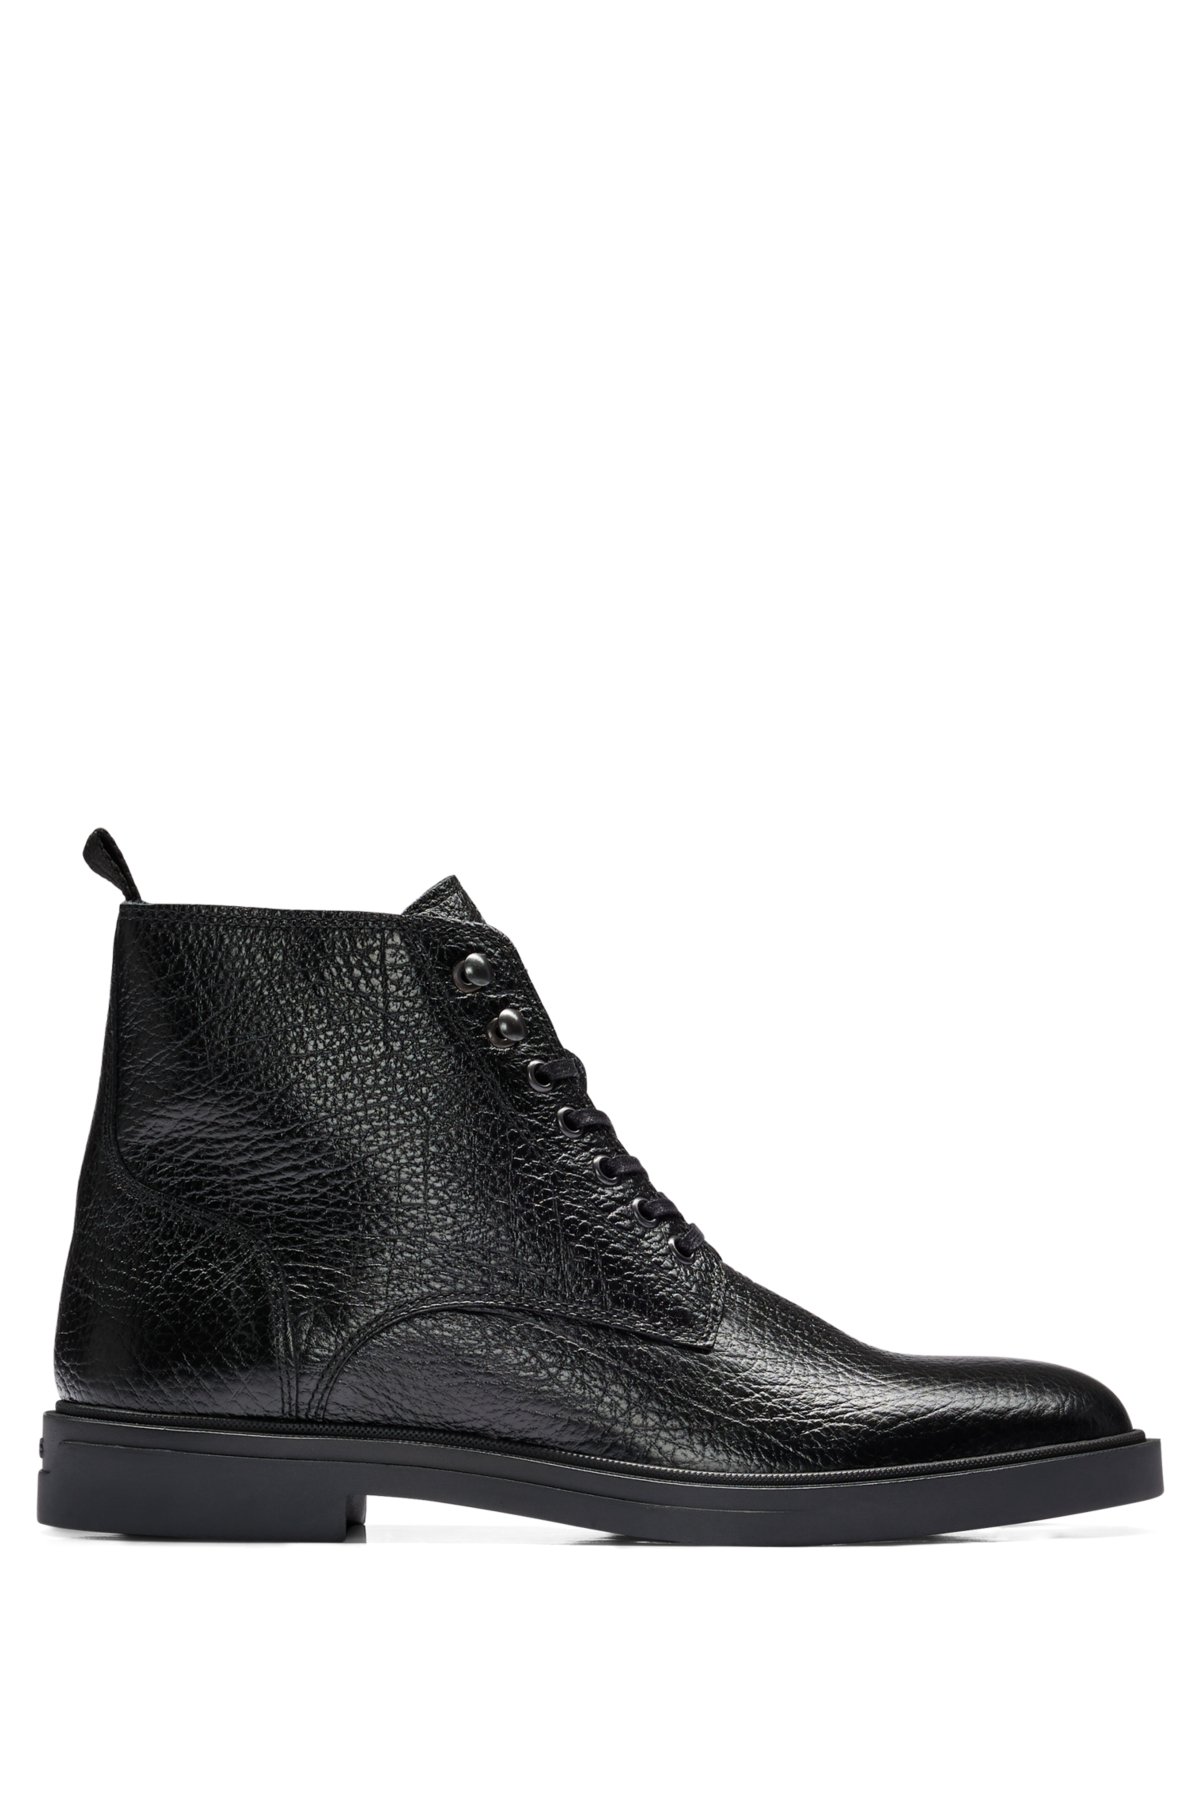 BOSS - Lace-up half boots in grained leather with zip